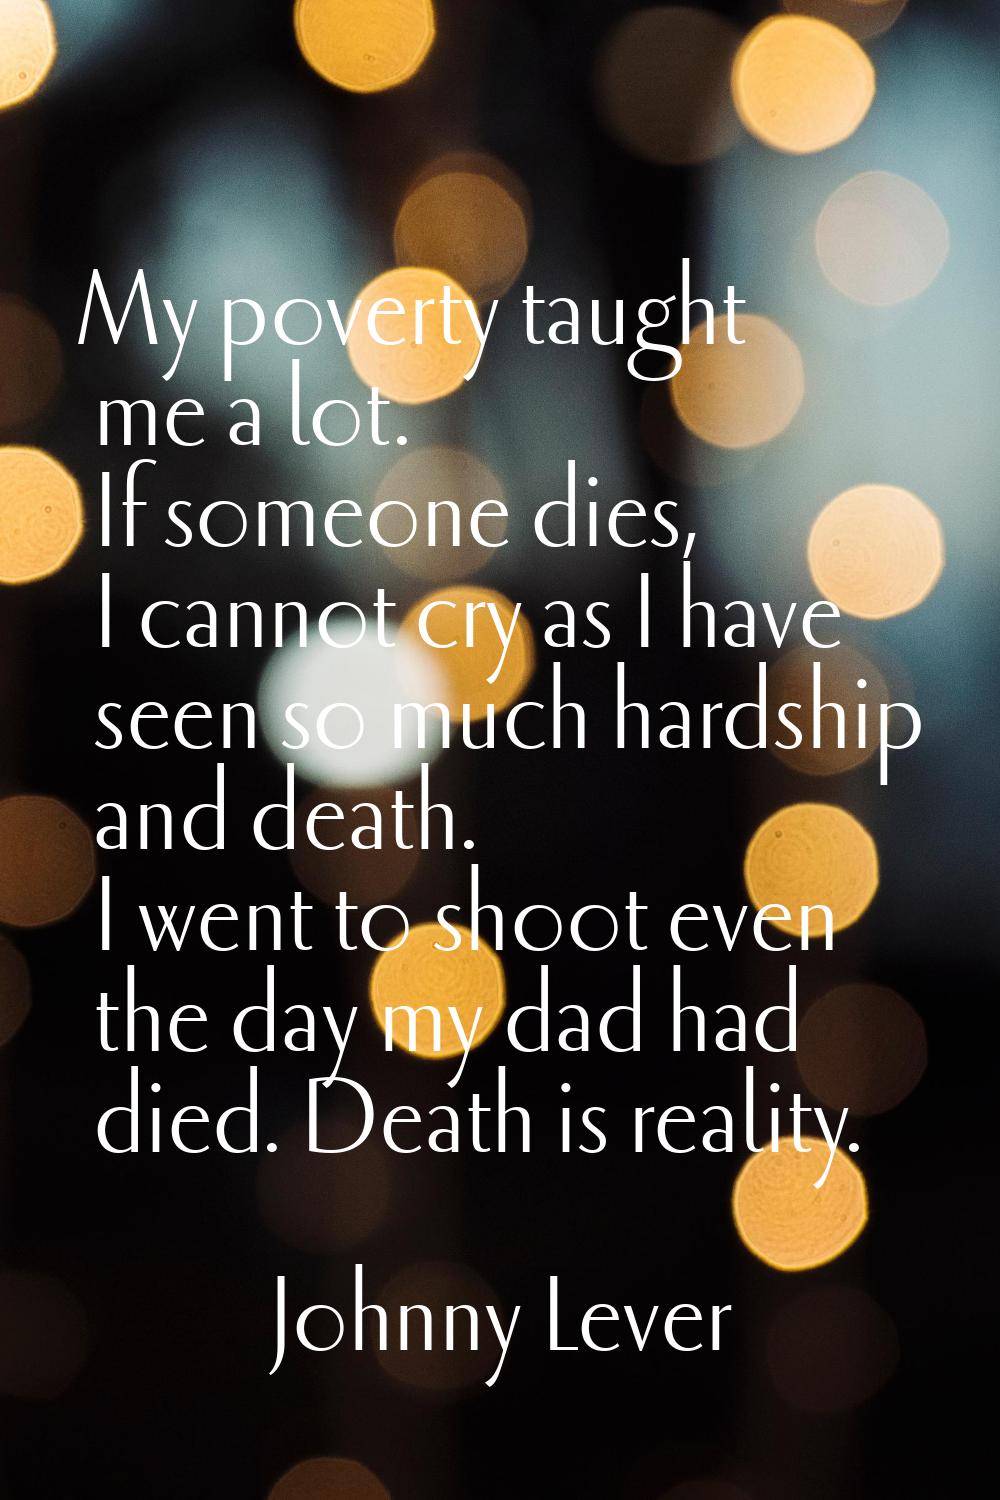 My poverty taught me a lot. If someone dies, I cannot cry as I have seen so much hardship and death